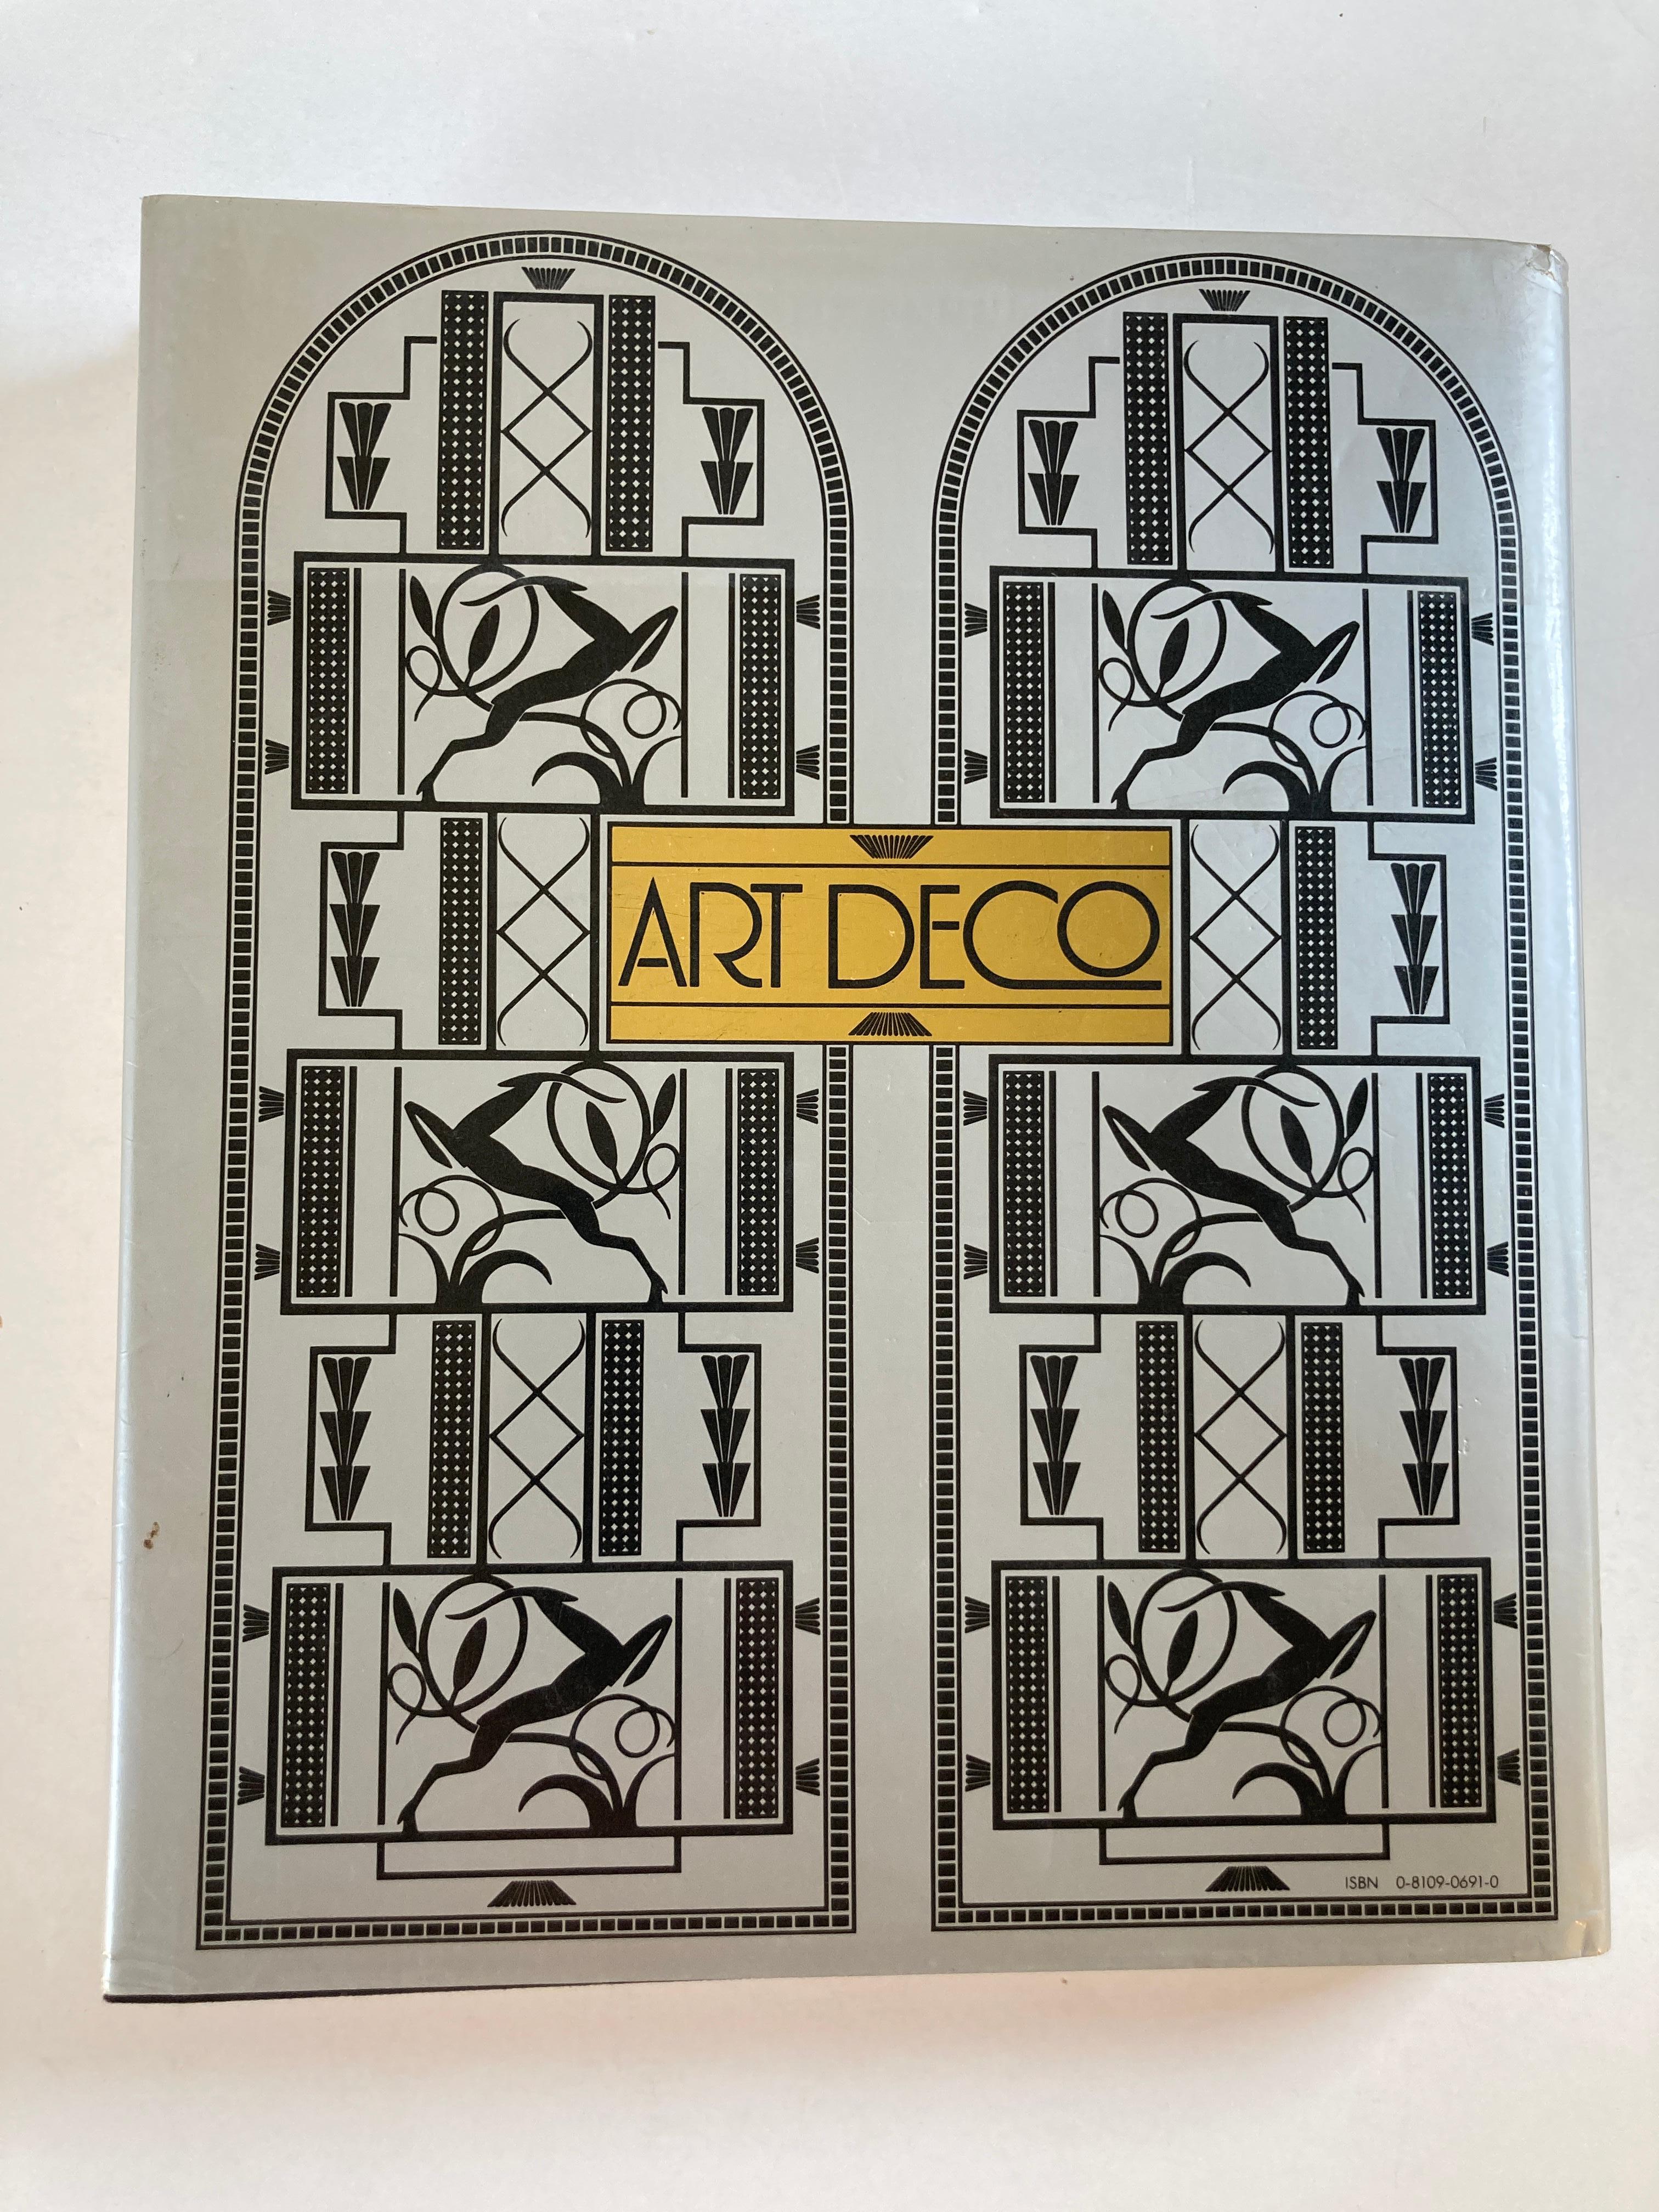 Art Deco by Arwas, Victor Edited by Frank Russell
Published by Published by Harry N. Abrams, 110 East 59th Street, New York, First Edition . 1980.
First edition hard back binding in publisher's original embossed black cloth covers, glossy black